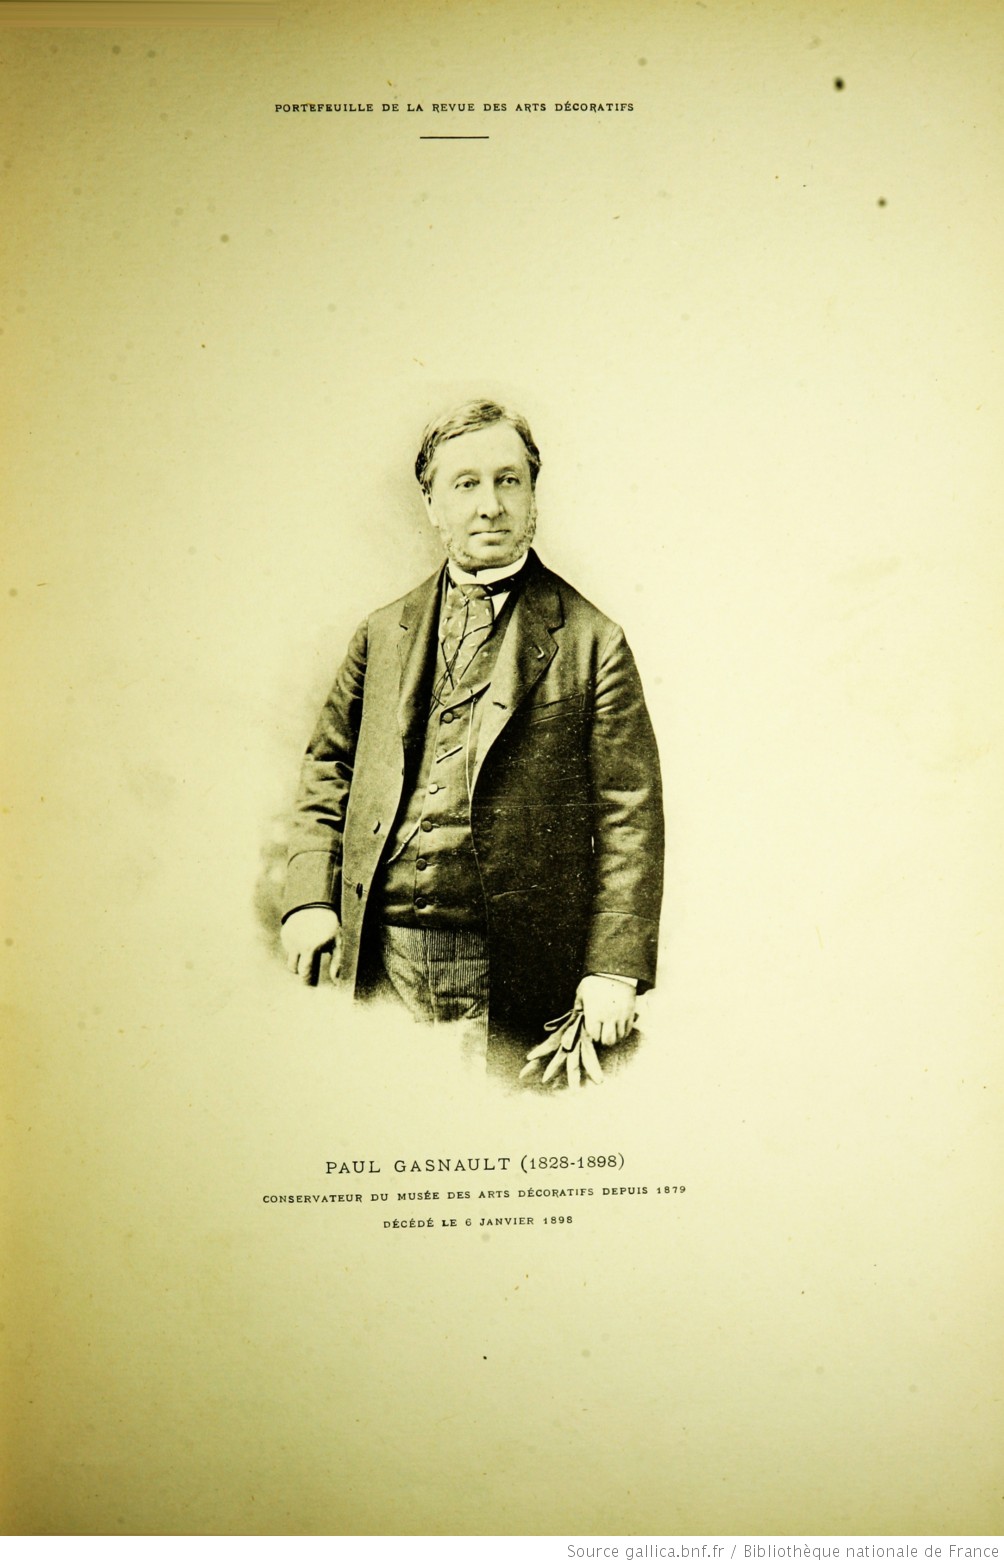 Printed portrait of Paul Gasnault